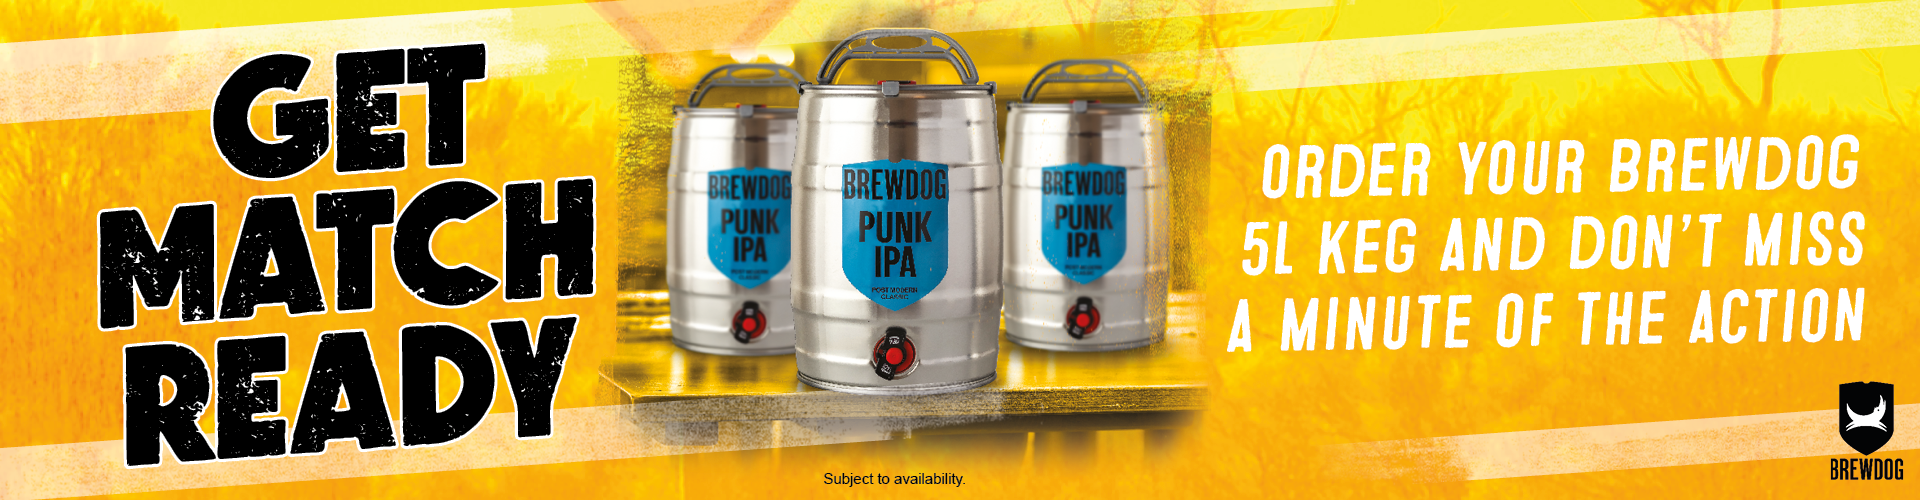 Get Match Ready - Order Your BrewDog 5L Keg and Don't Miss a Minute of the Action